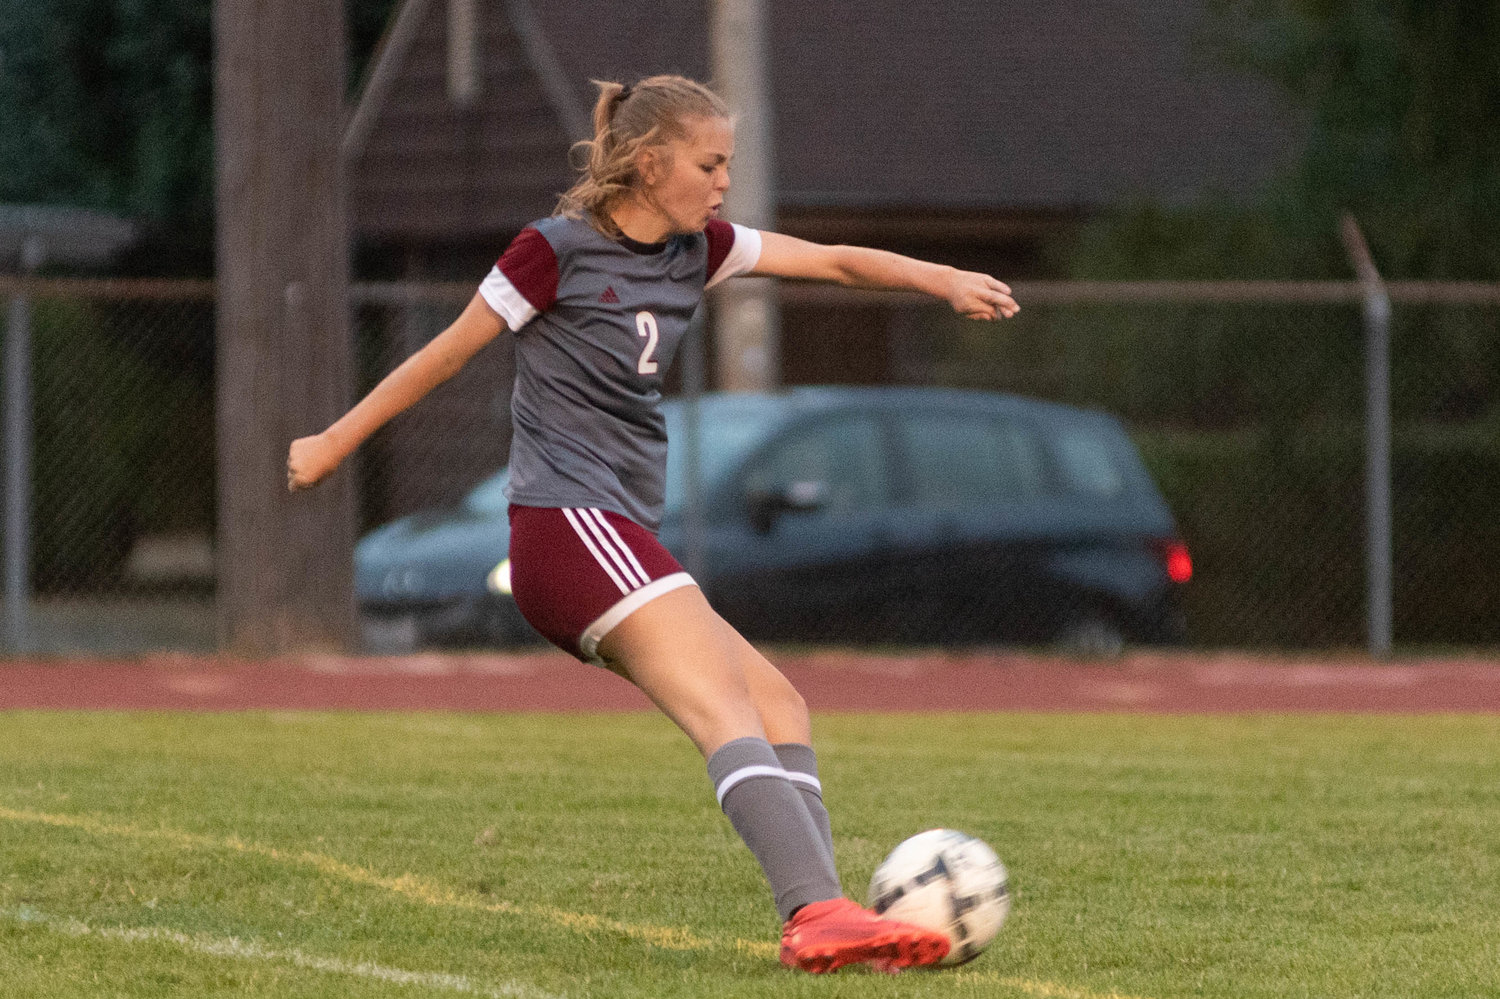 Senior midfielder Maddy Casper drills a goal from the top of the box in W.F. West's 5-0 win over Centralia Thursday night.